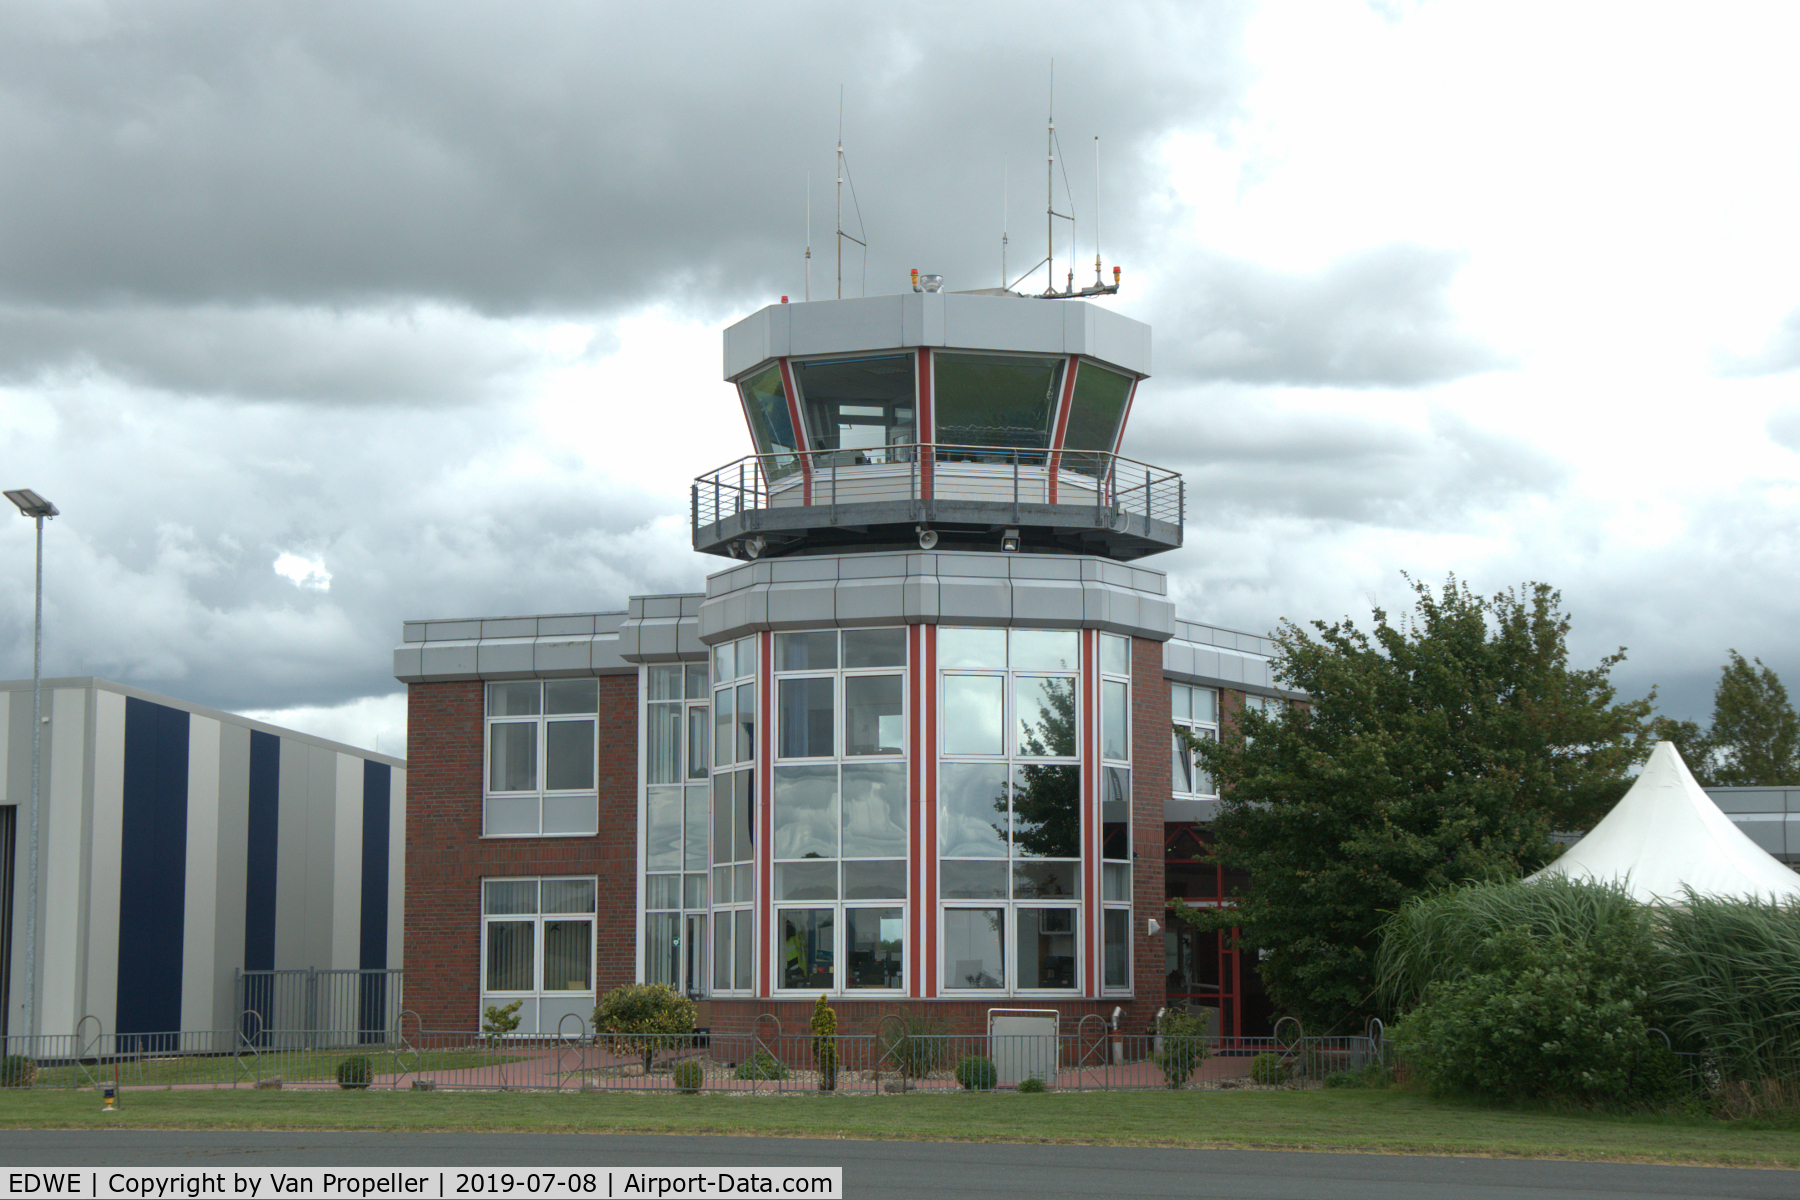 EDWE Airport - The tower of Emden airport, Germany